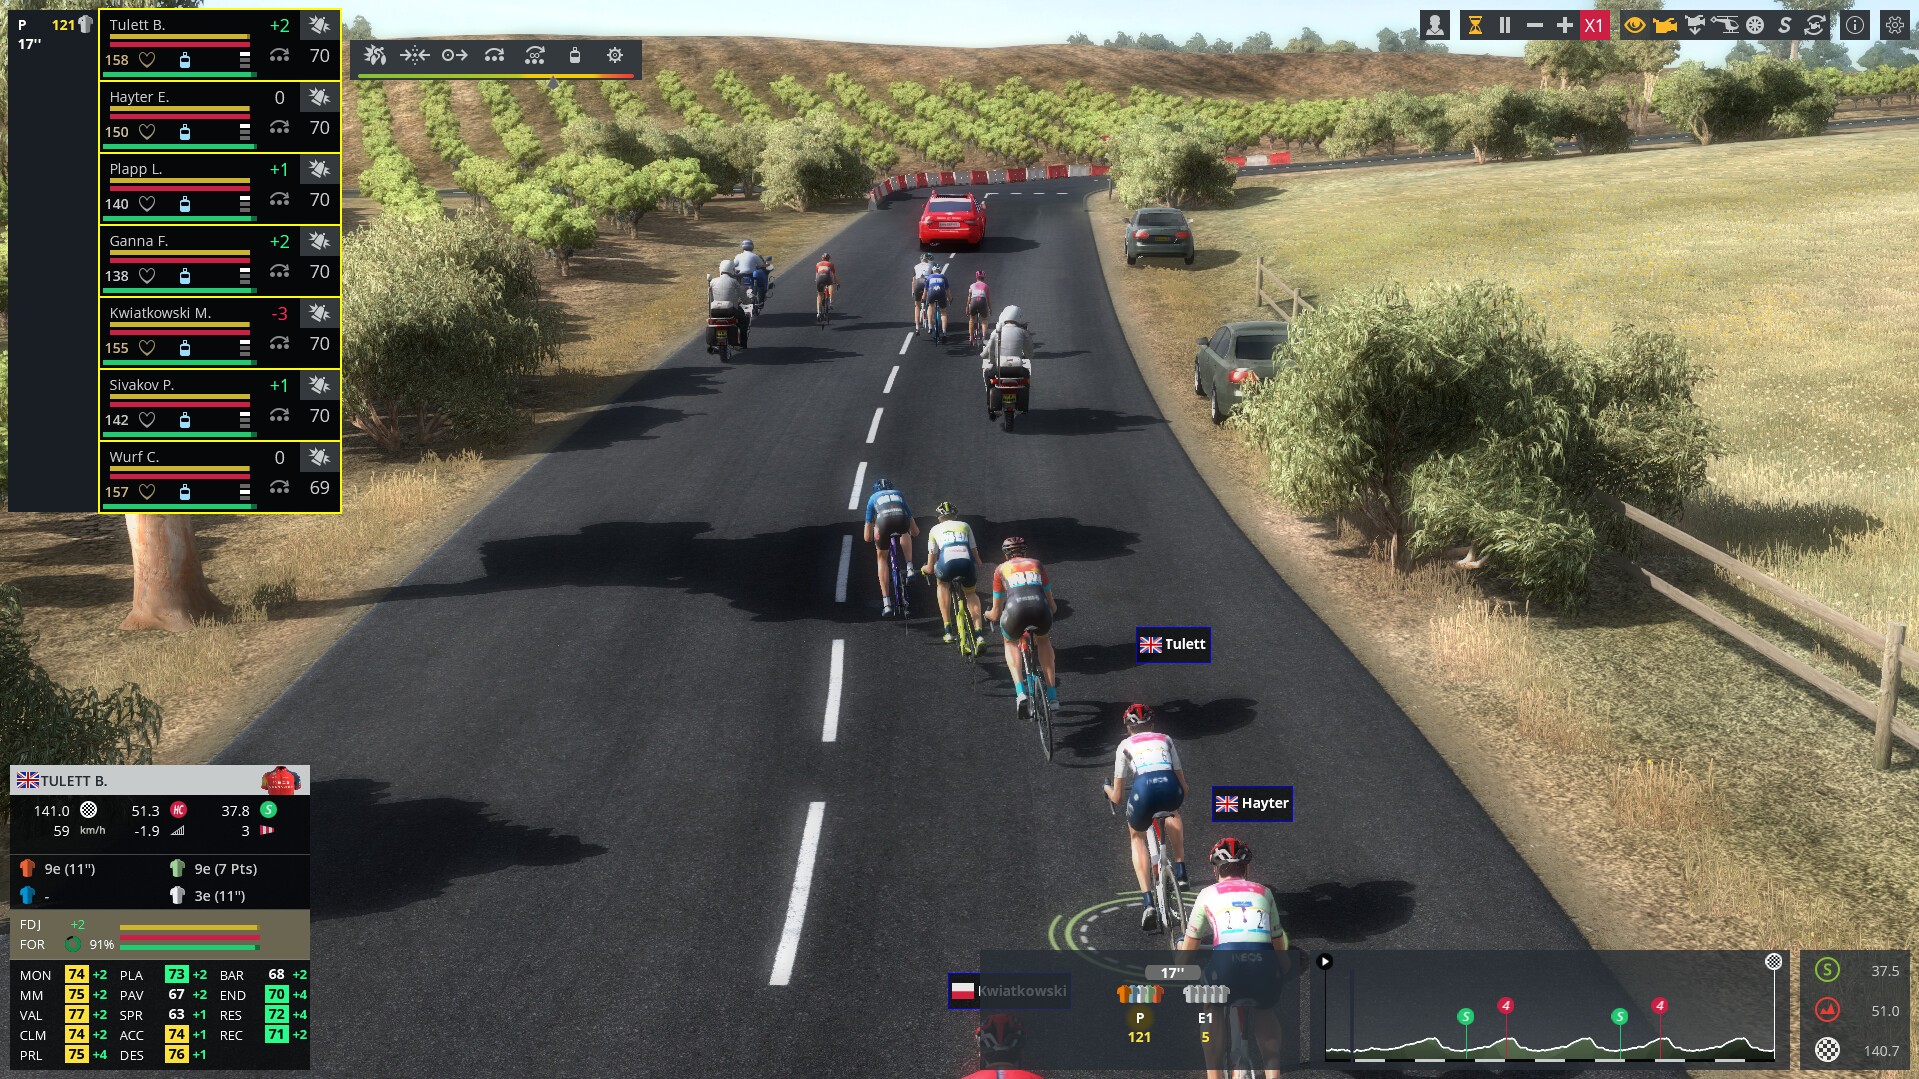 Buy Pro Cycling Manager 2022 Steam